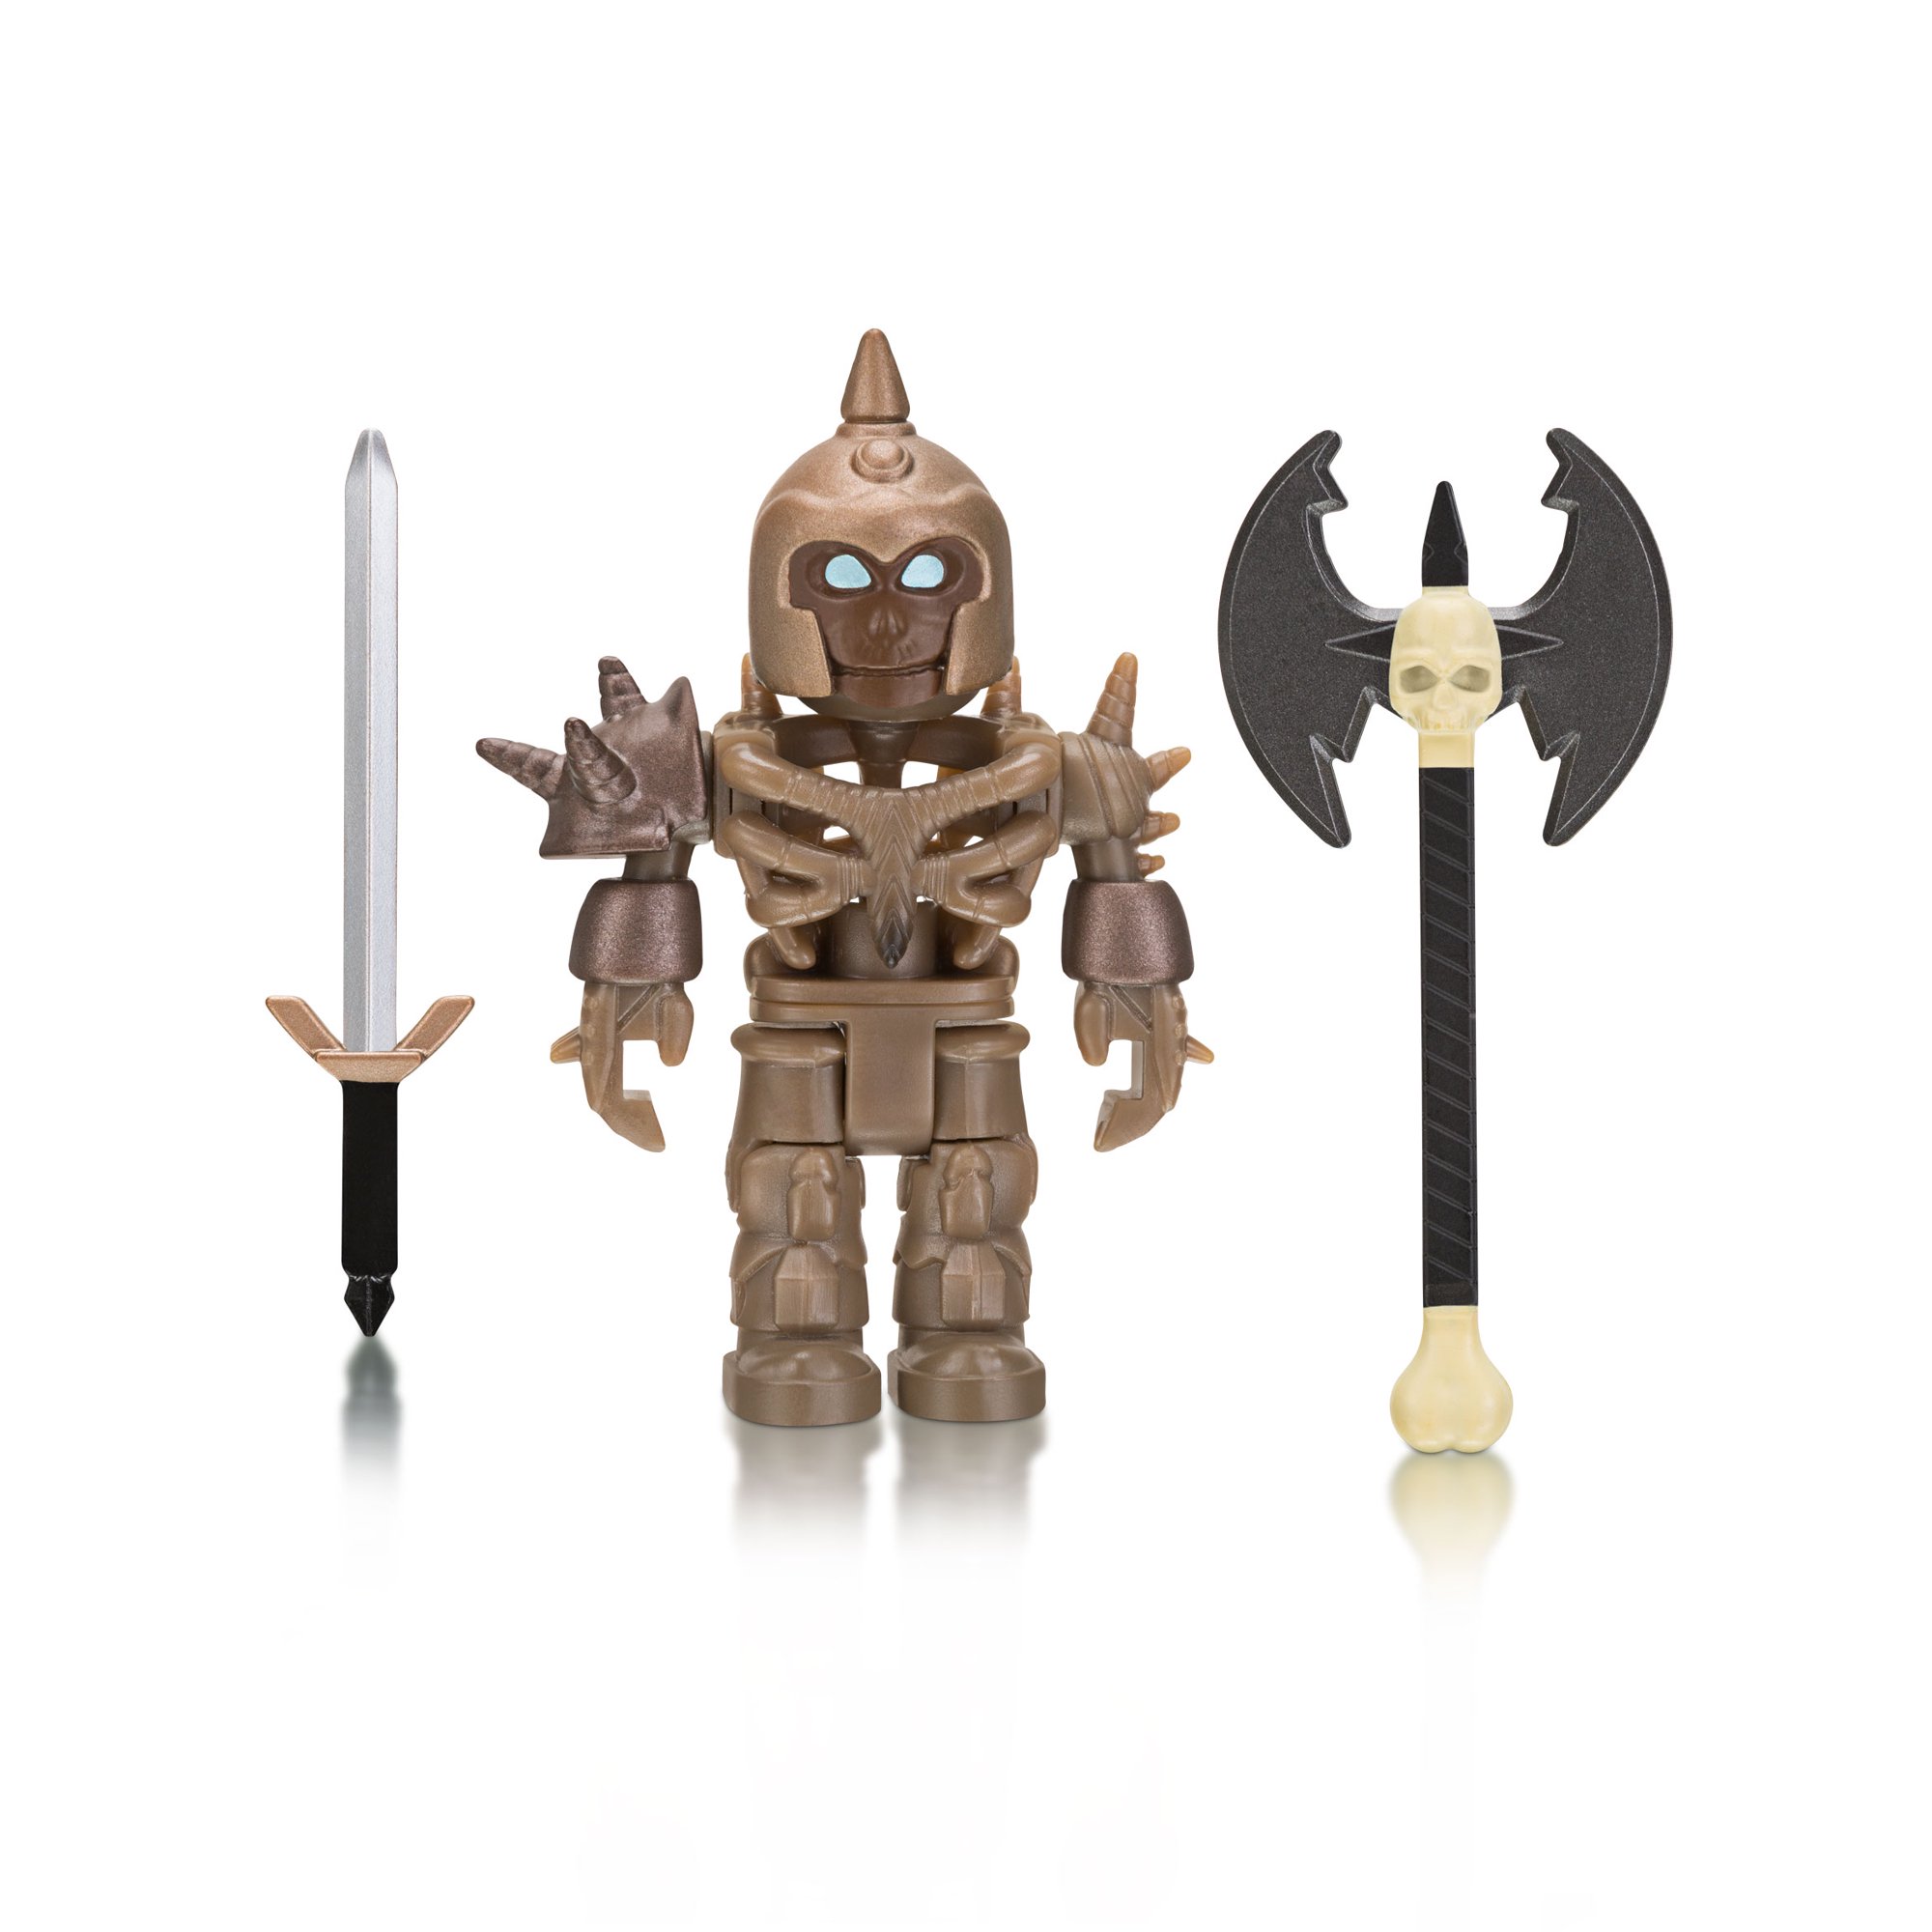 Roblox Action Collection Endermoor Skeleton Figure Pack Includes Exclusive Virtual Item Walmart Com Walmart Com - roblox celebrity collection the golden bloxy award figure pack includes exclusive virtual item walmart com walmart com